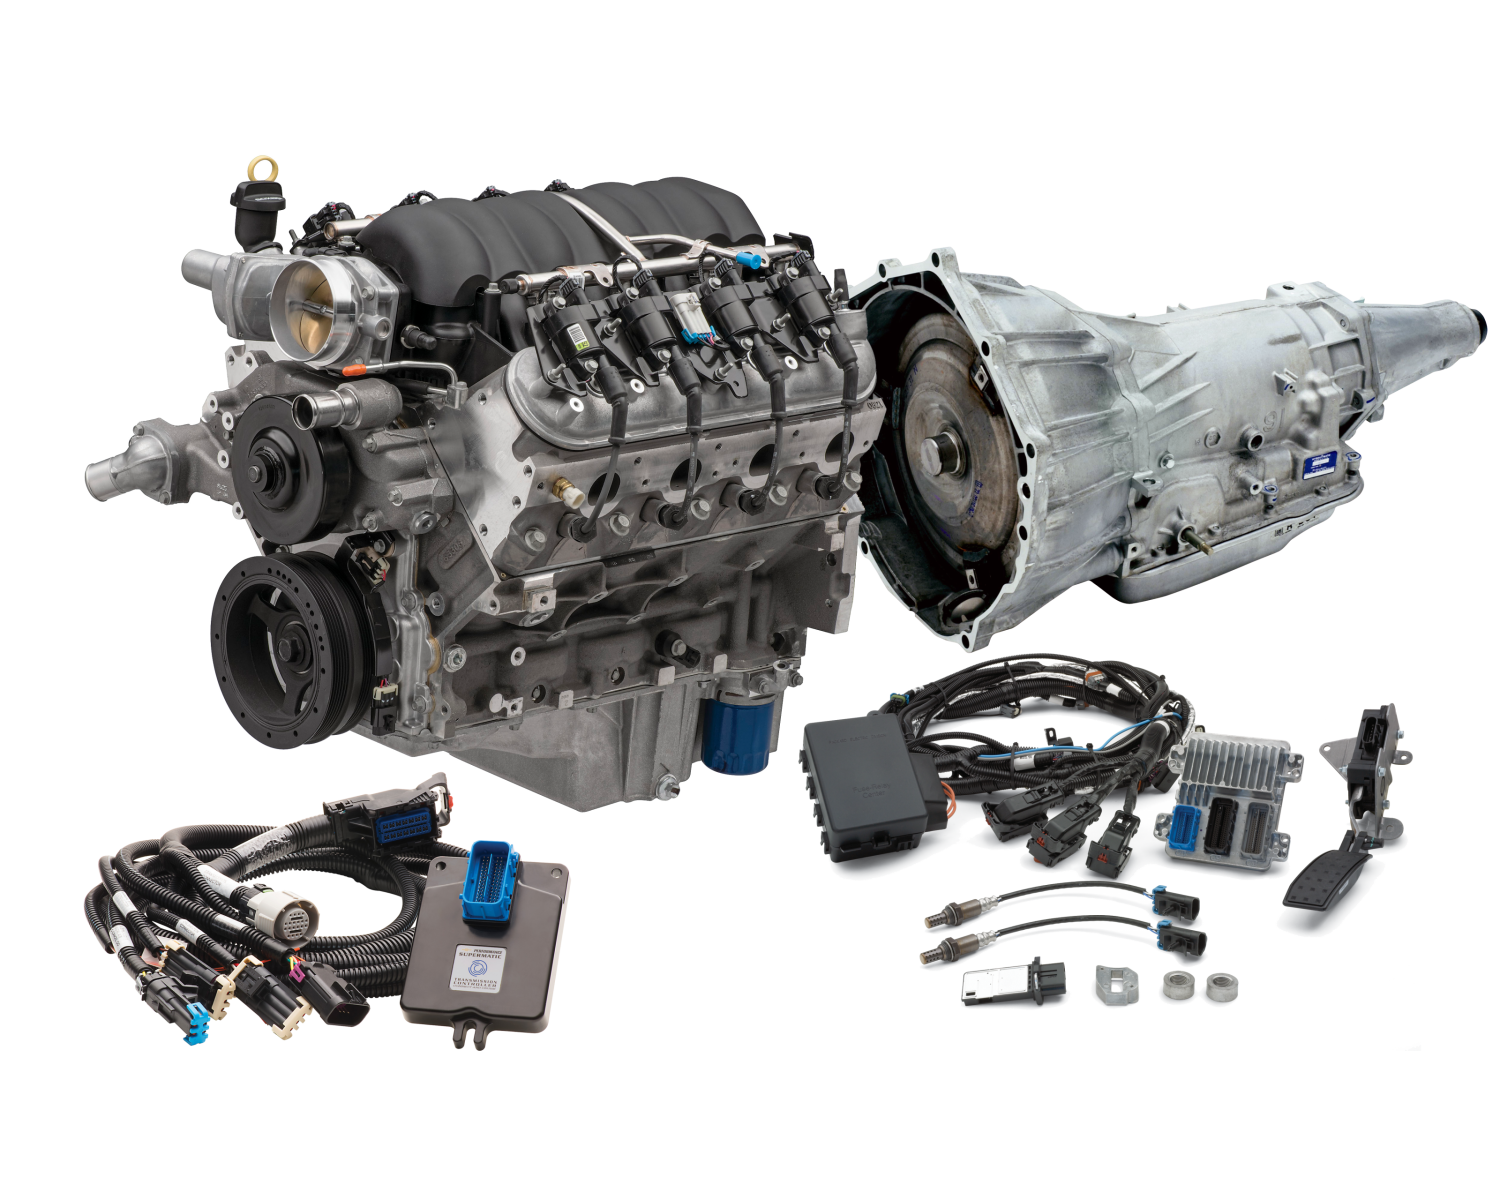 Chevrolet Performance Ls3 430hp And 4l65e Transmission Connect And Cruise